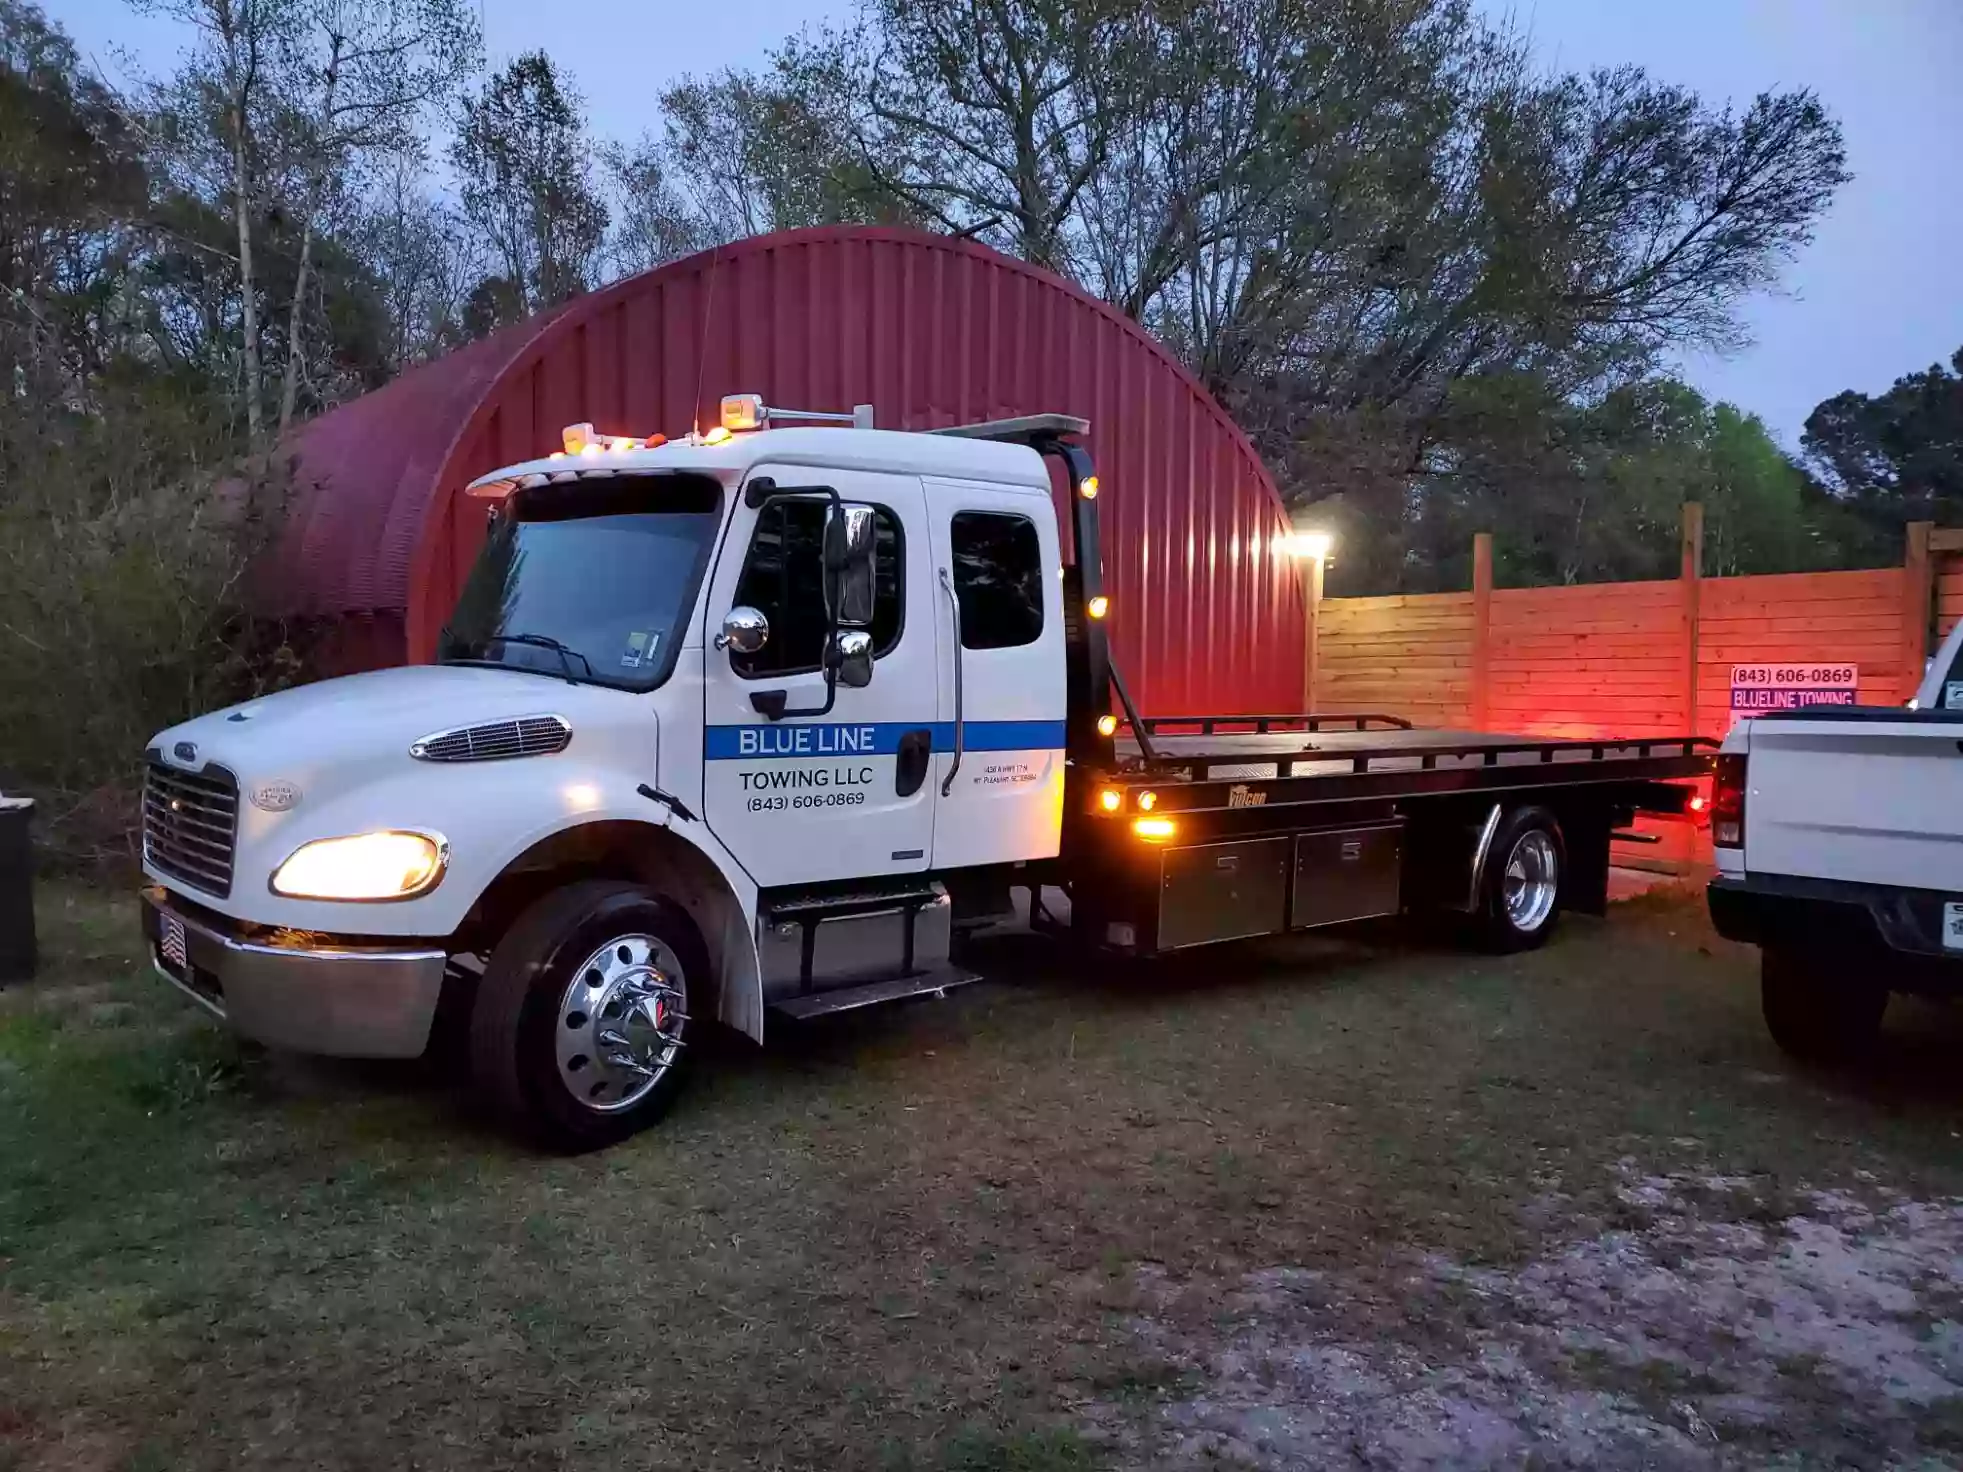 Blue Line Towing, Awendaw, SC